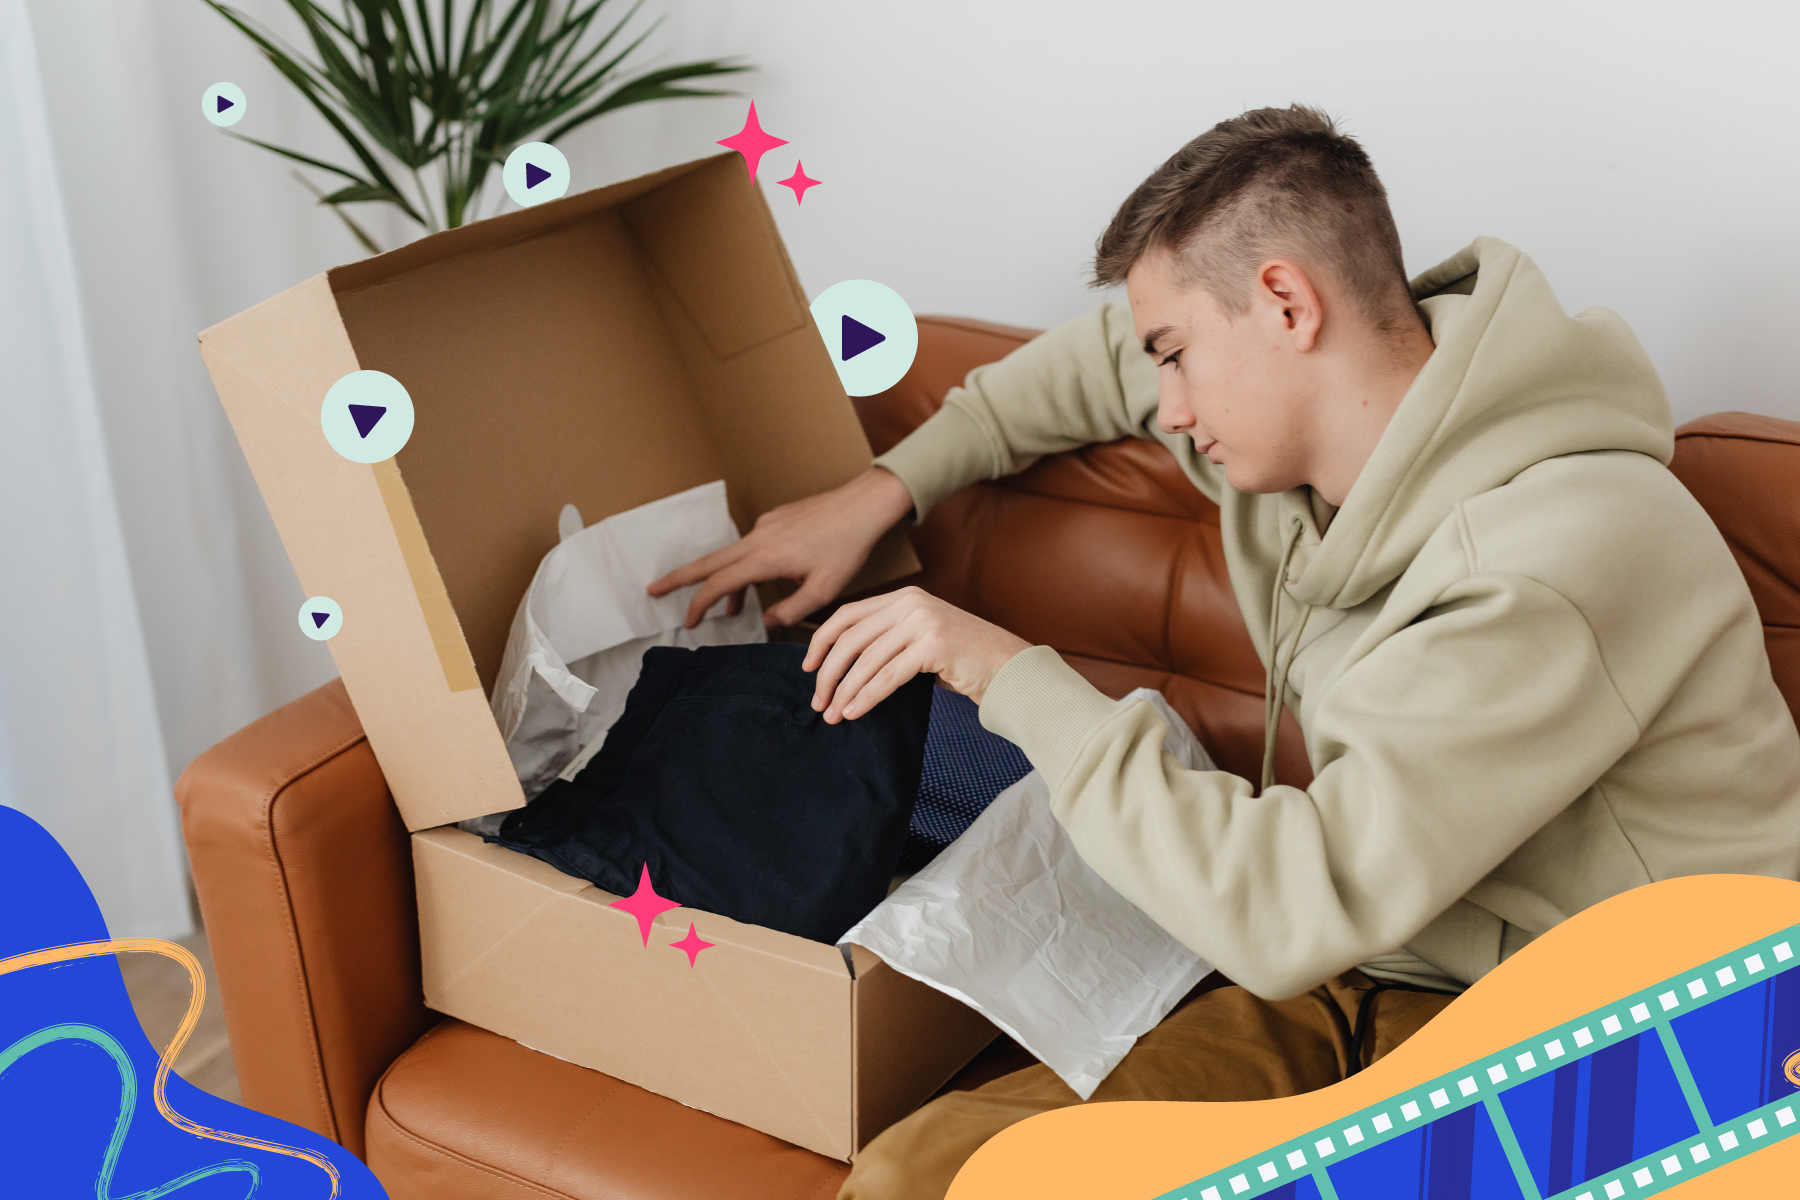 Unboxing Videos: Tips for Brands of What Makes an Unboxing Video